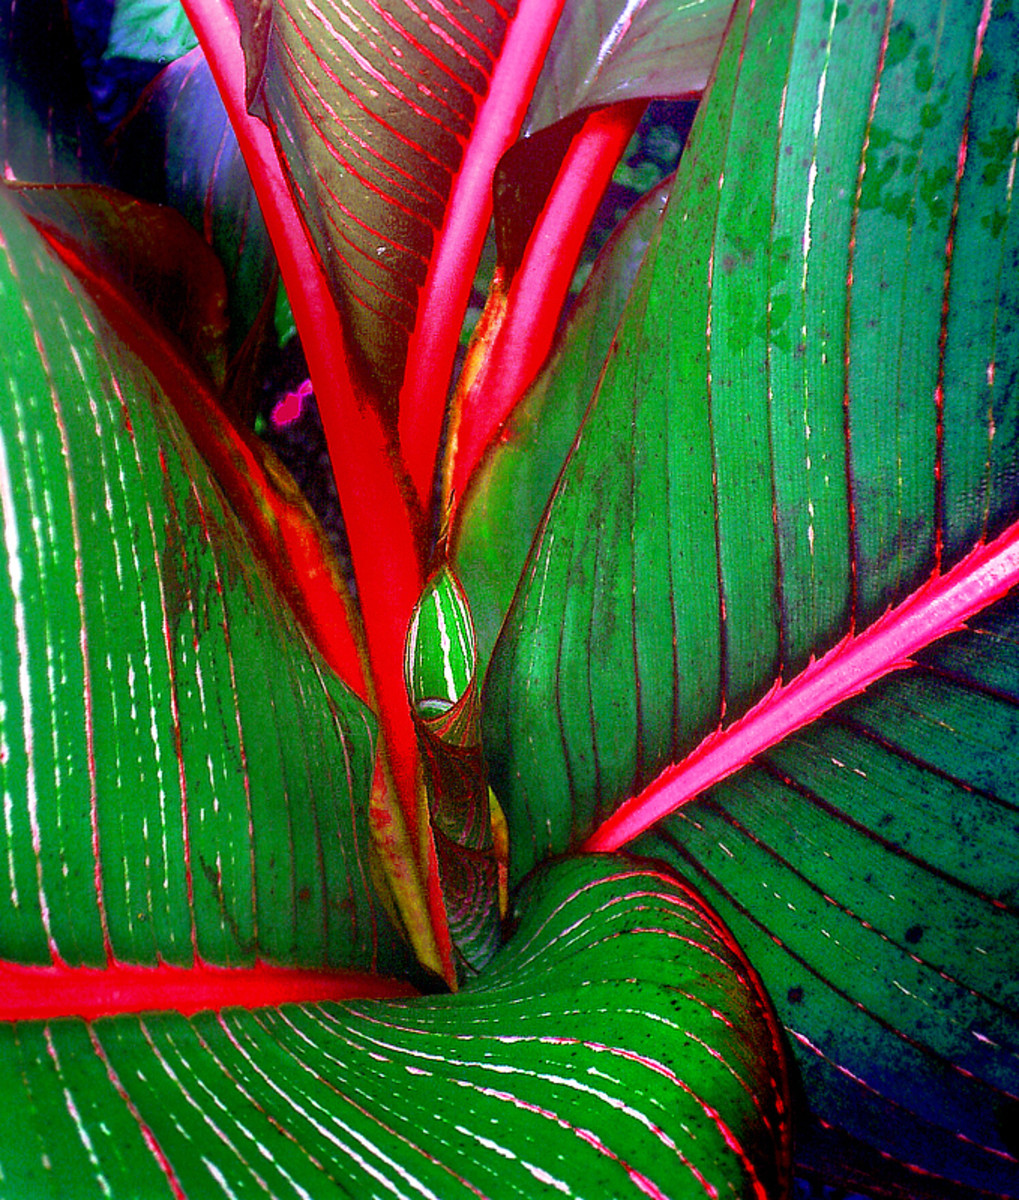 Red Leaf Heliconia